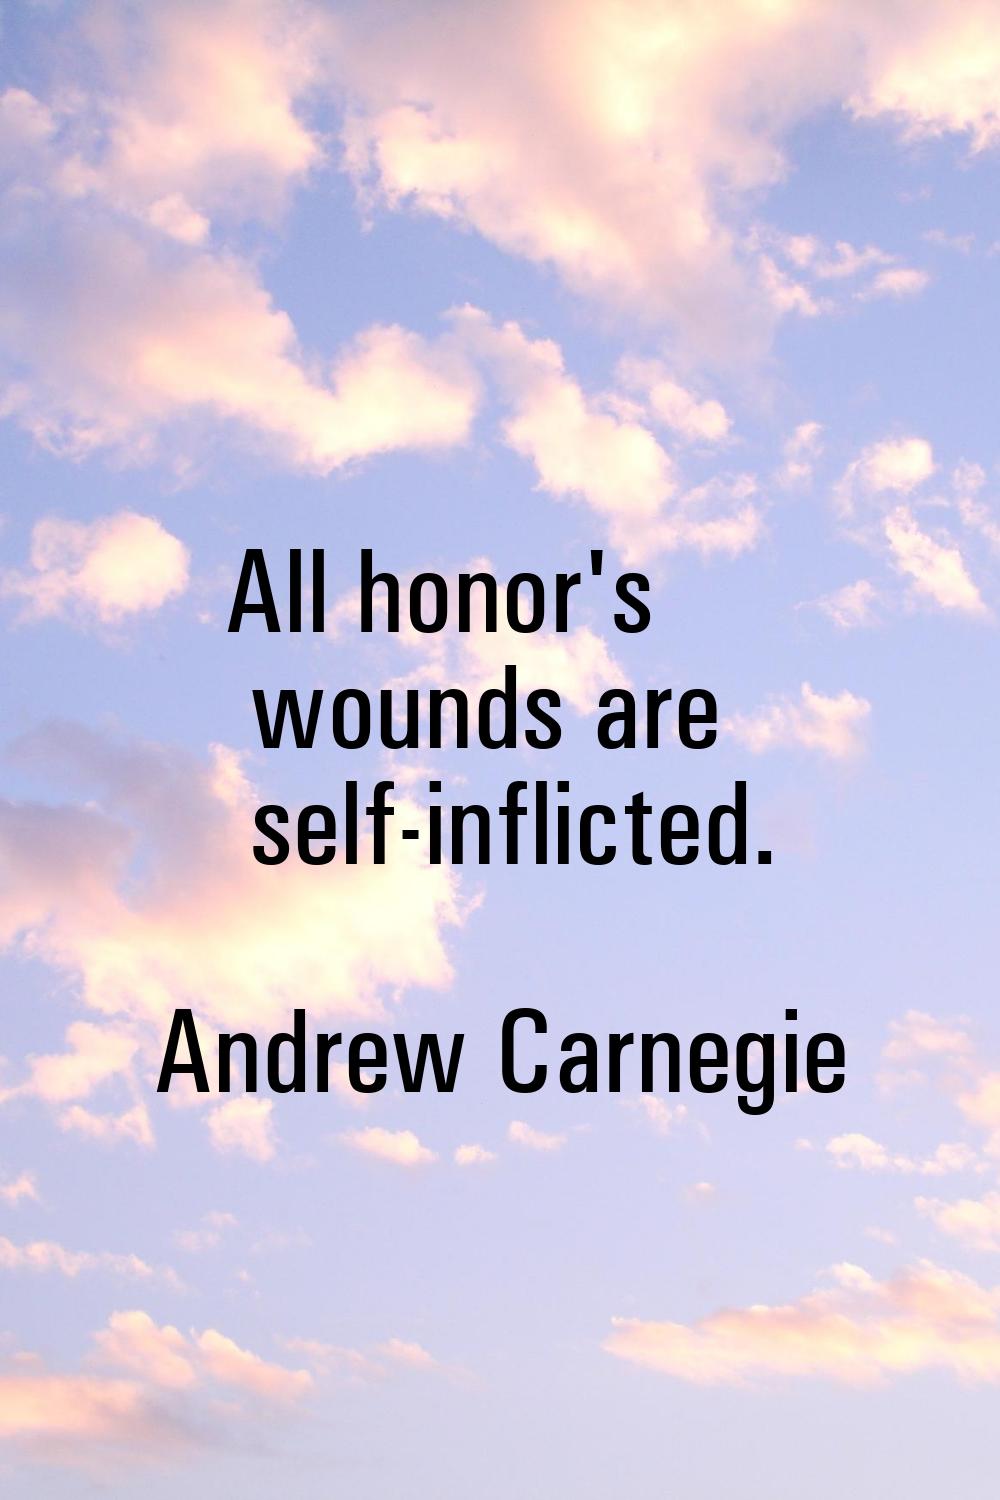 All honor's wounds are self-inflicted.